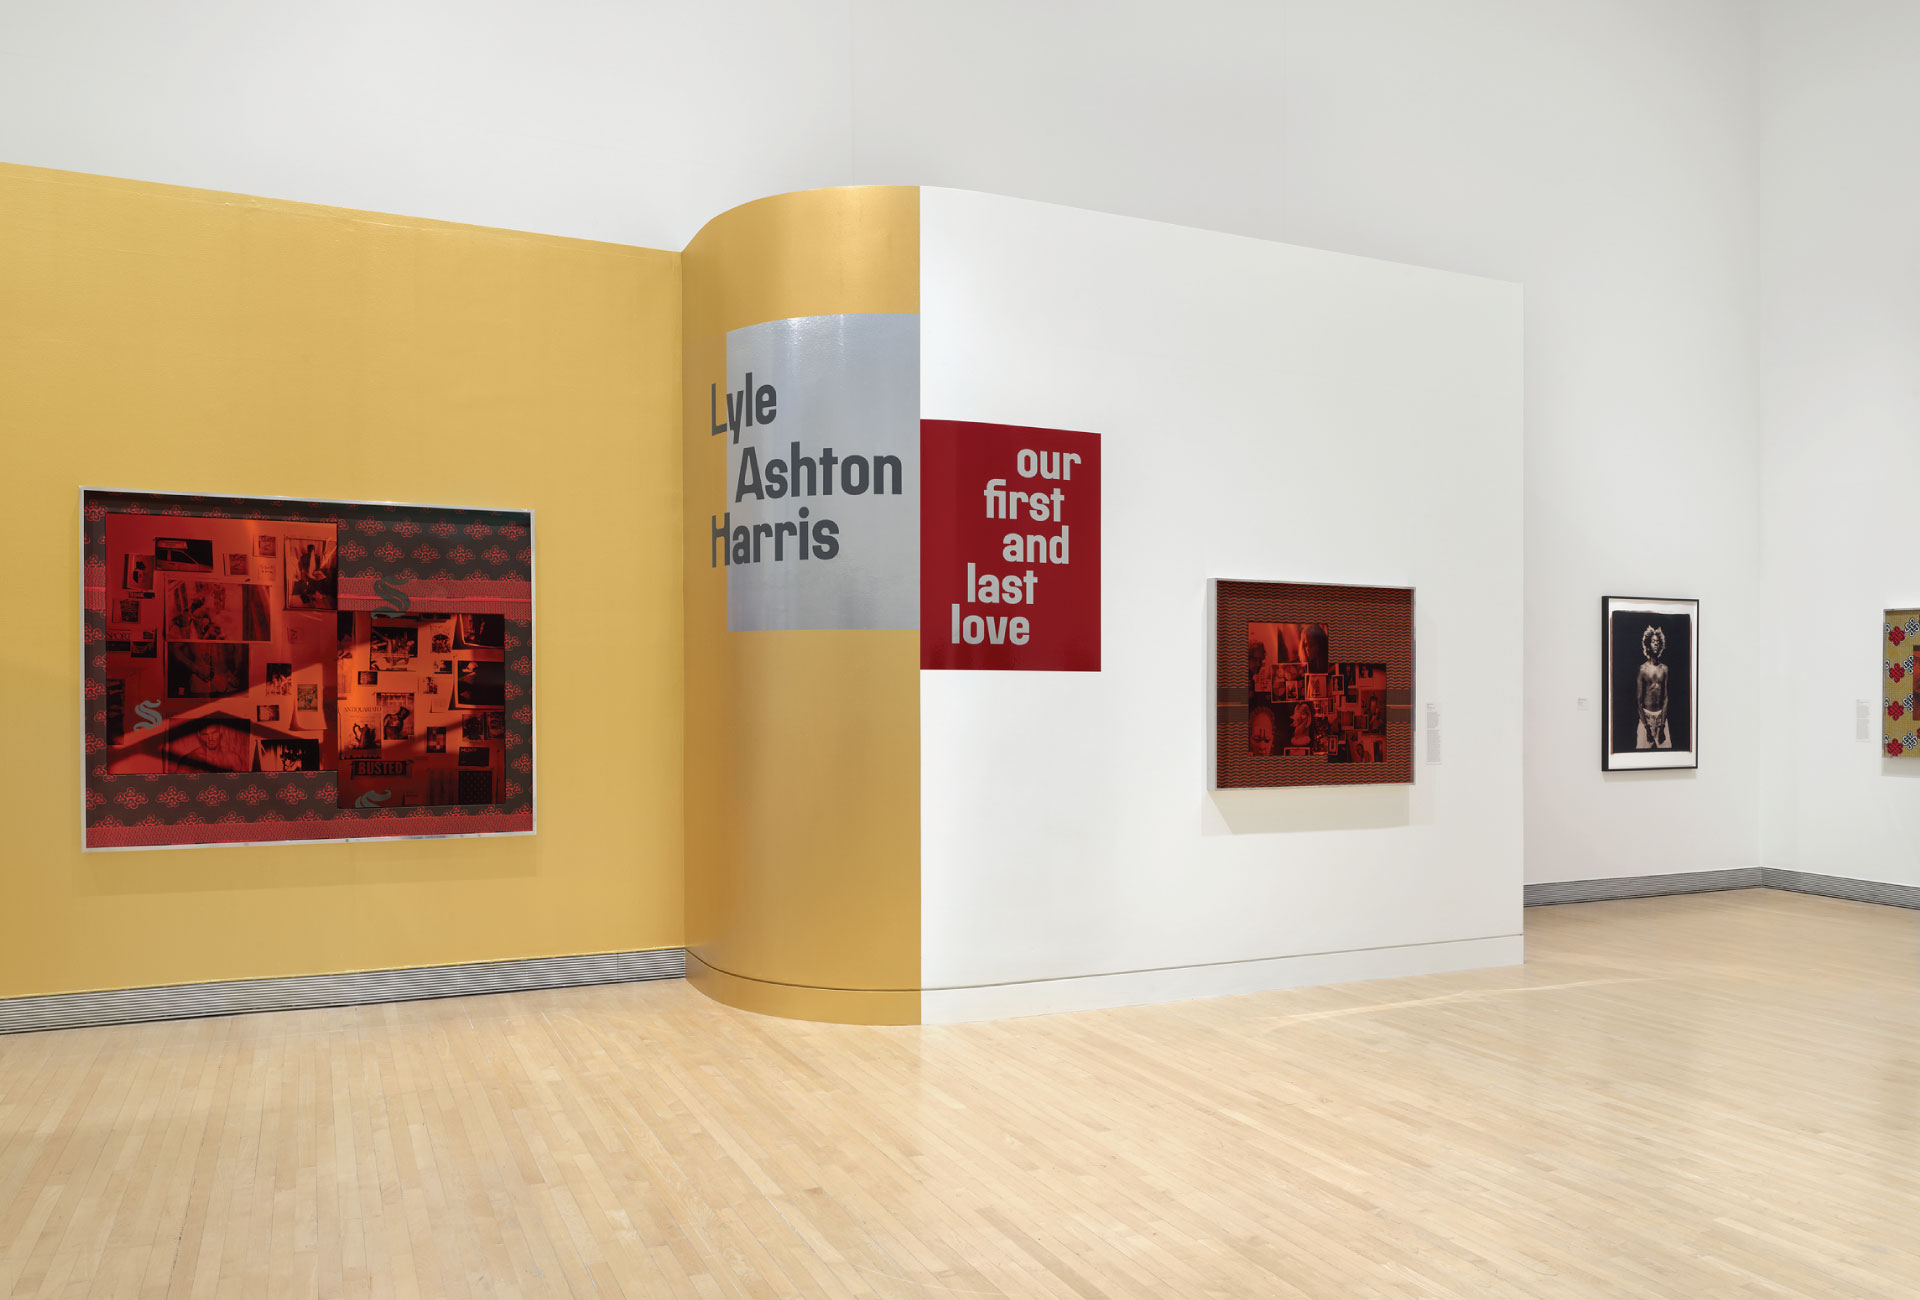 Installation view of "Lyle Ashton Harris: Our first and last love."